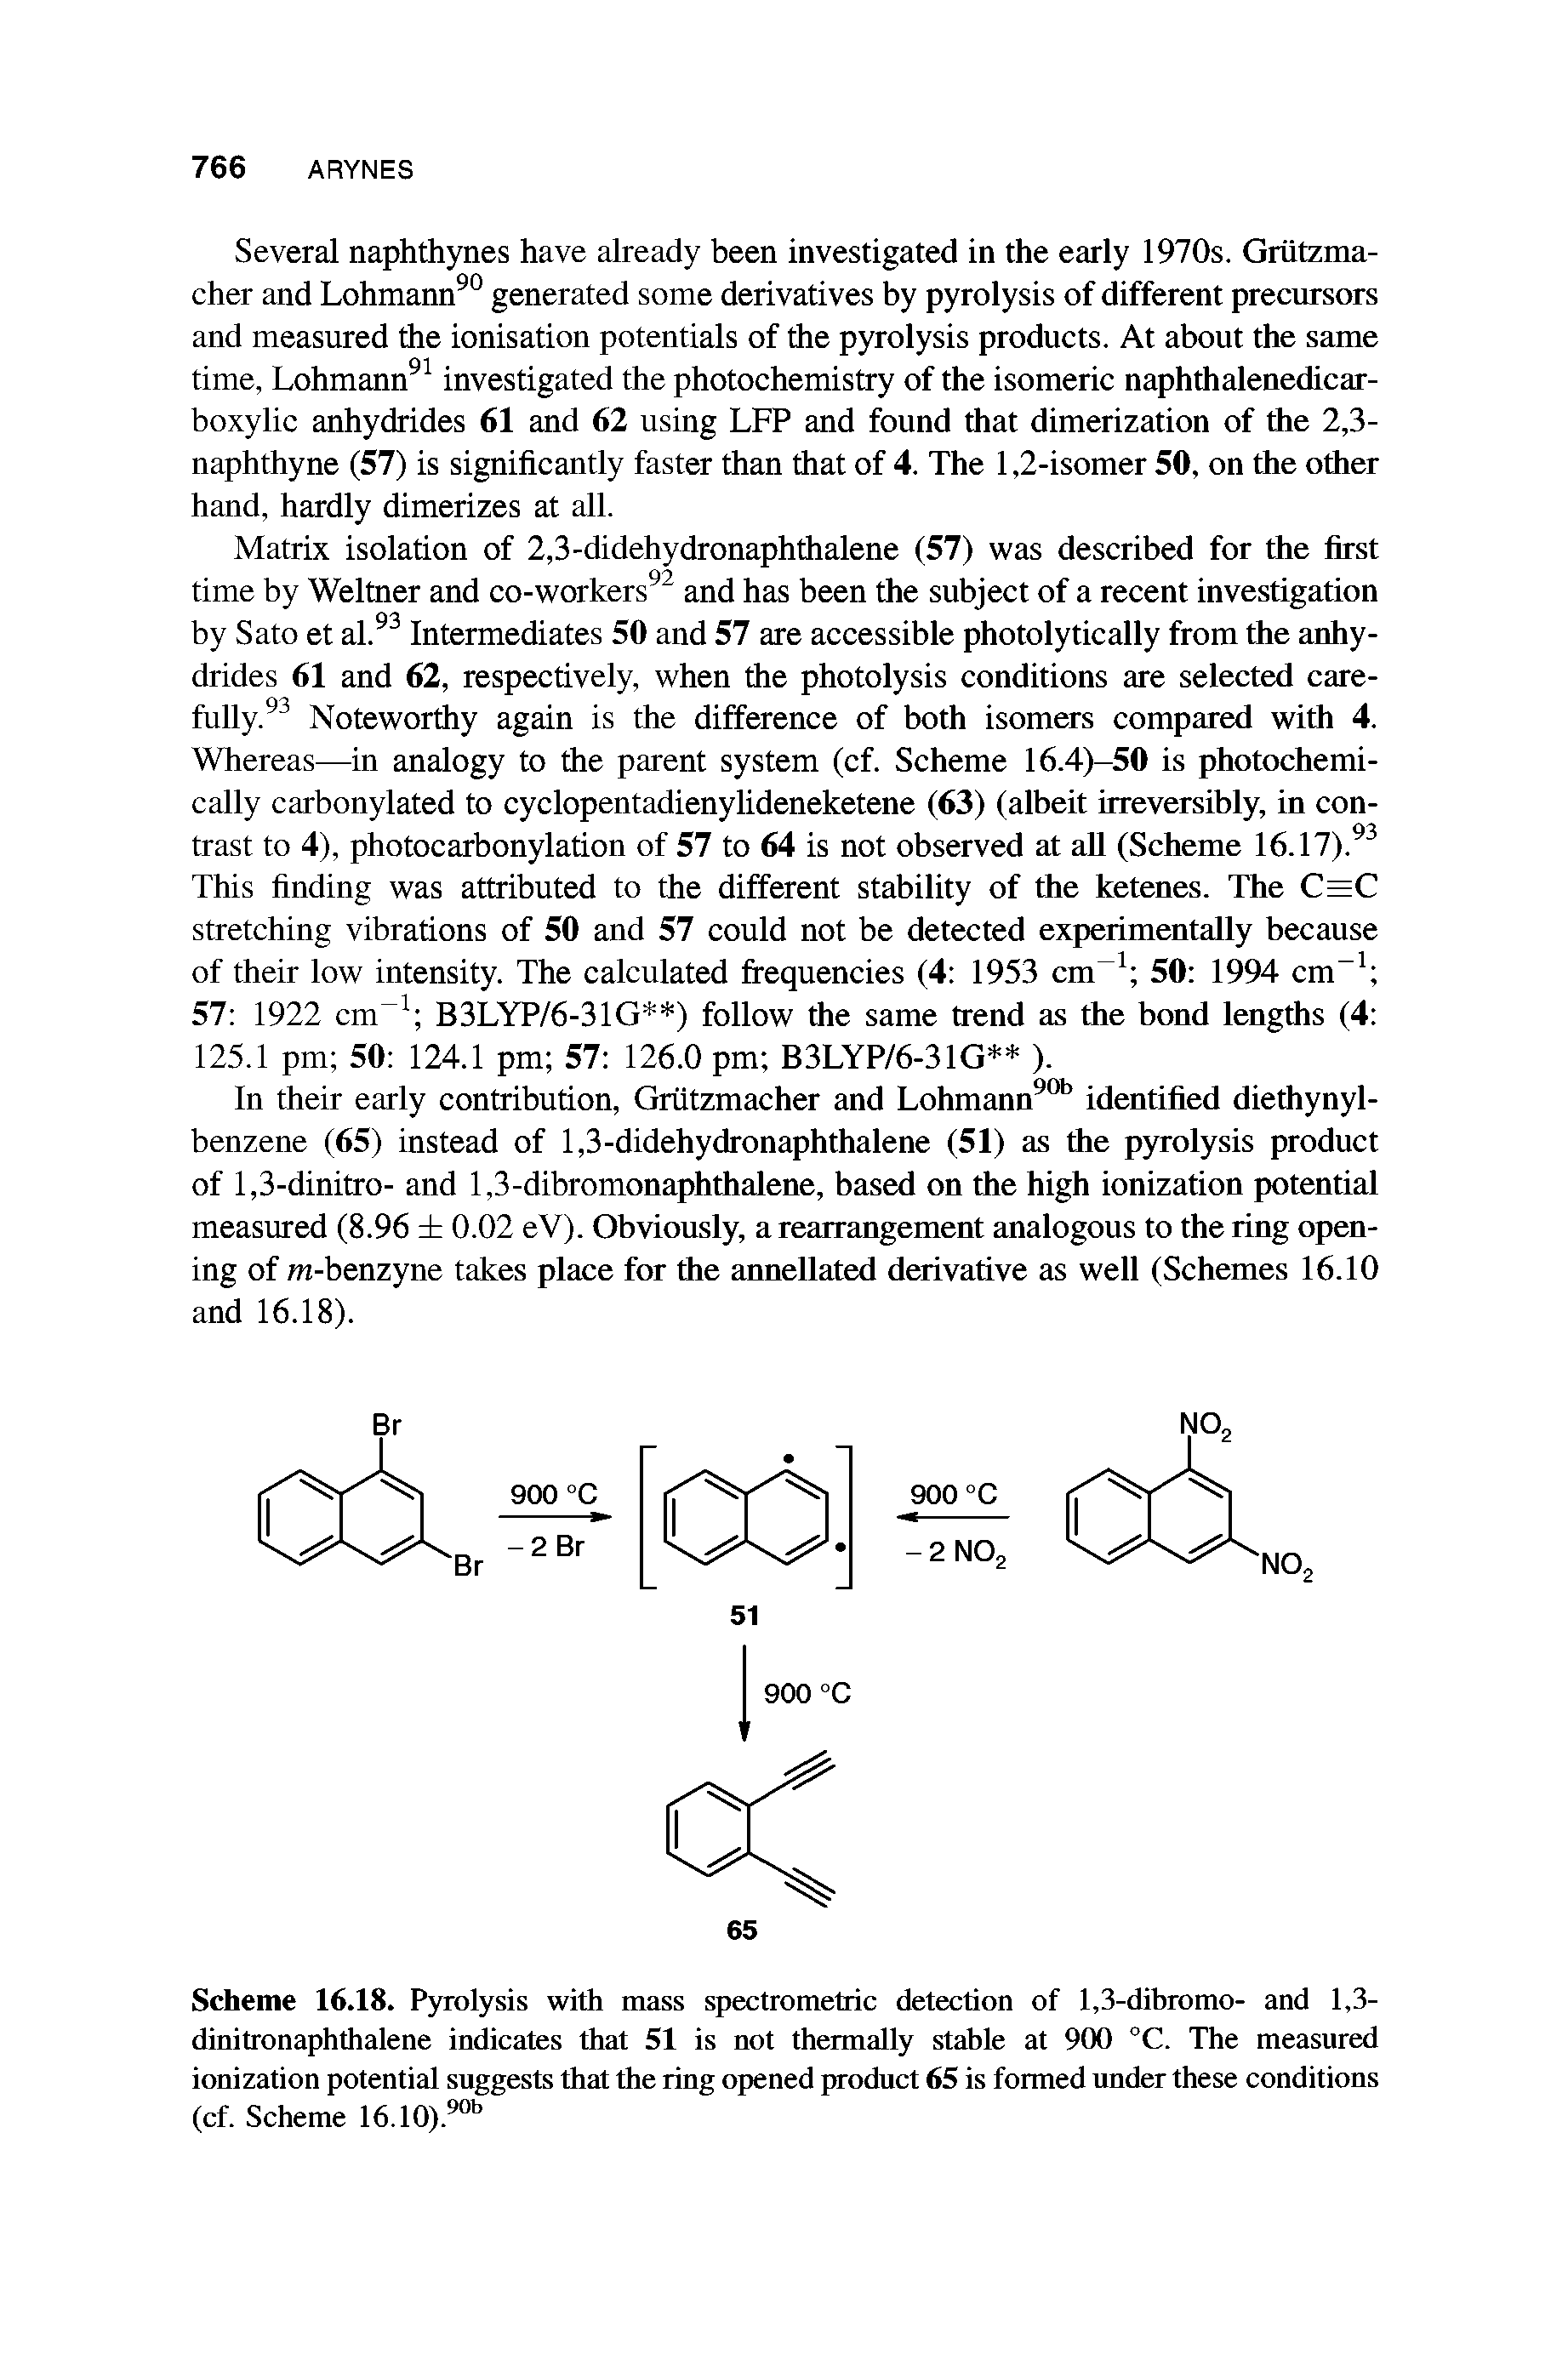 Scheme 16.18. Pyrolysis with mass spectrometric detection of 1,3-dibromo- and 1,3-dinitronaphthalene indicates that 51 is not thermally stable at 900 C. The measured ionization potential suggests that the ring opened product 65 is formed under these conditions (cf. Scheme 16.10). ...